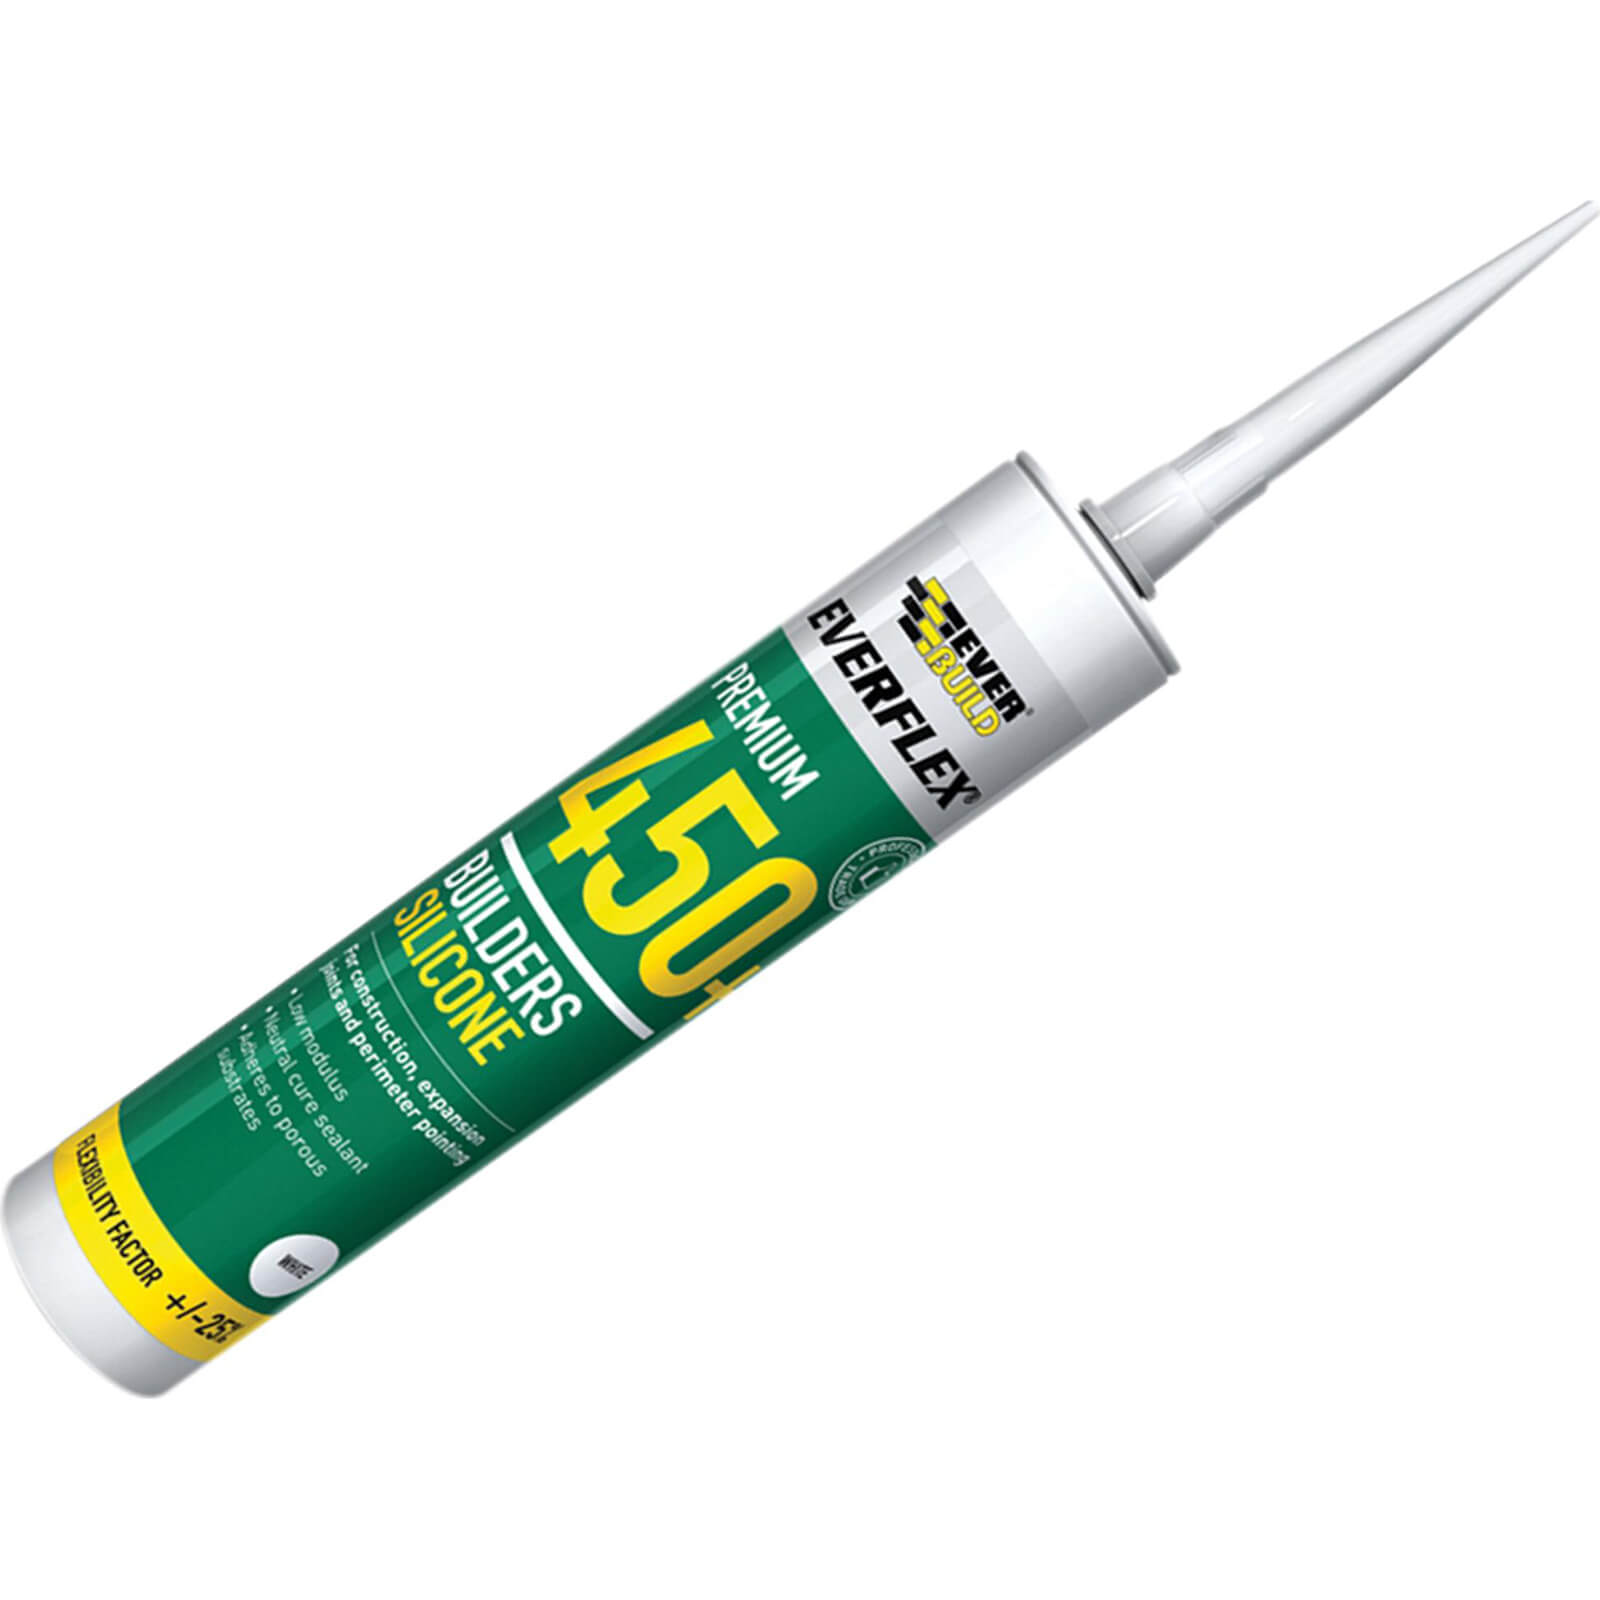 Image of Everbuild Builders Silicone Sealant Brown 310ml